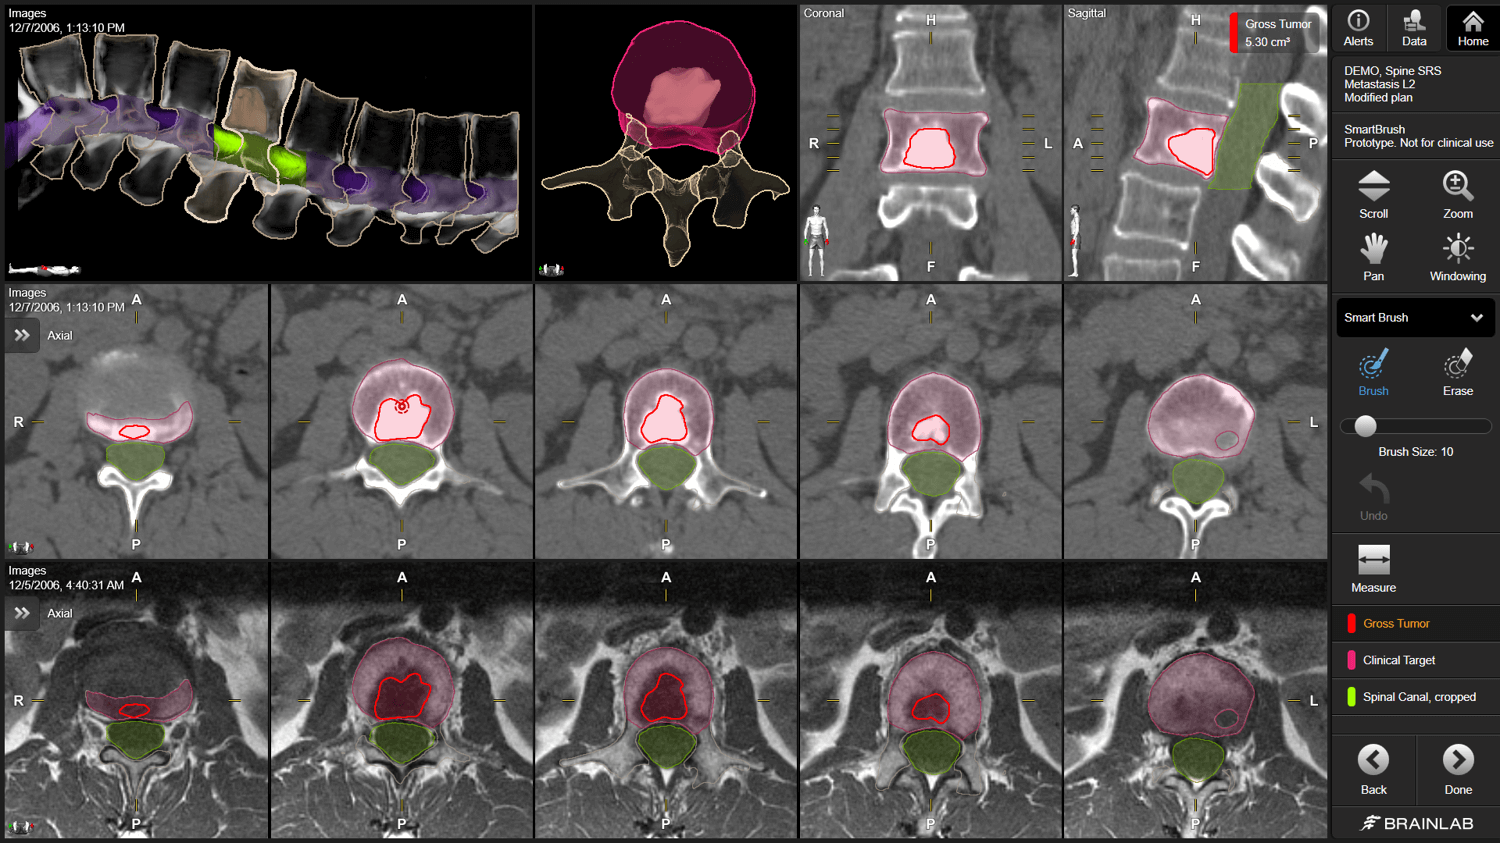 Software screenshot of Elements SmartBrush software as used for segmenting parts of the spine for a spinal radiotherapy treatment.